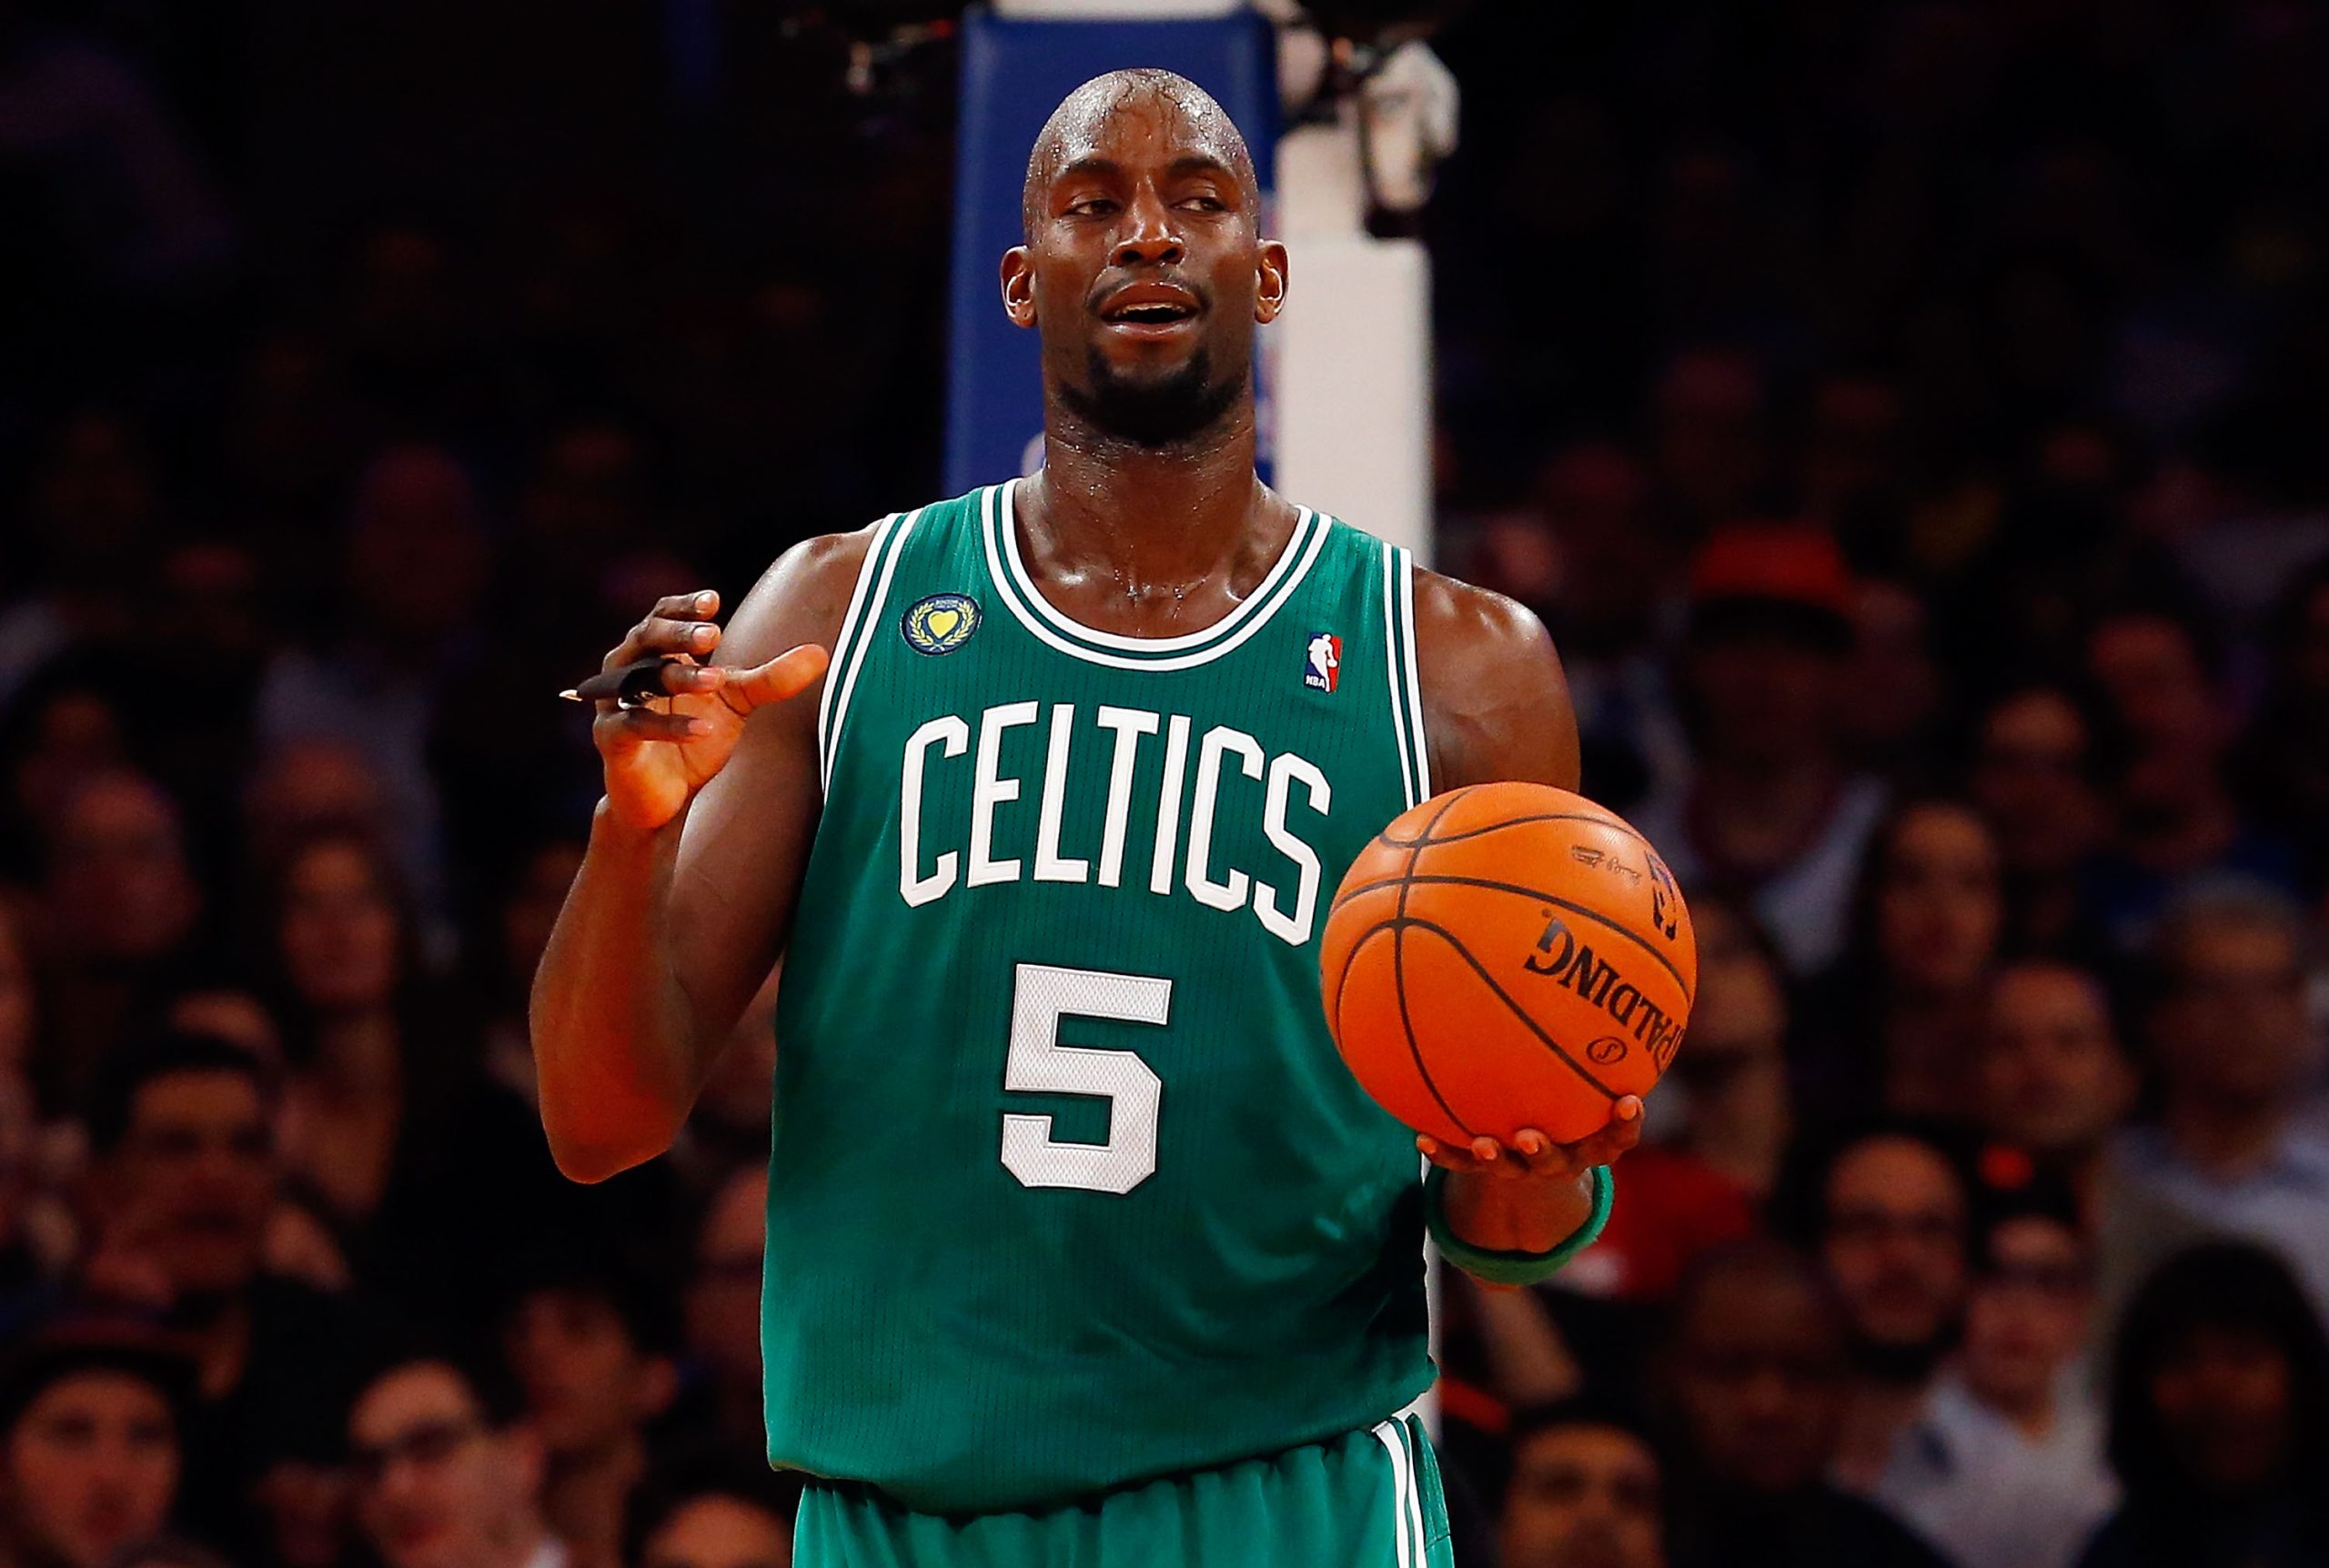 GARNETT'S JERSEY RETIREMENT ALSO MEANT PEACE FOR THE UNFORGETTABLE